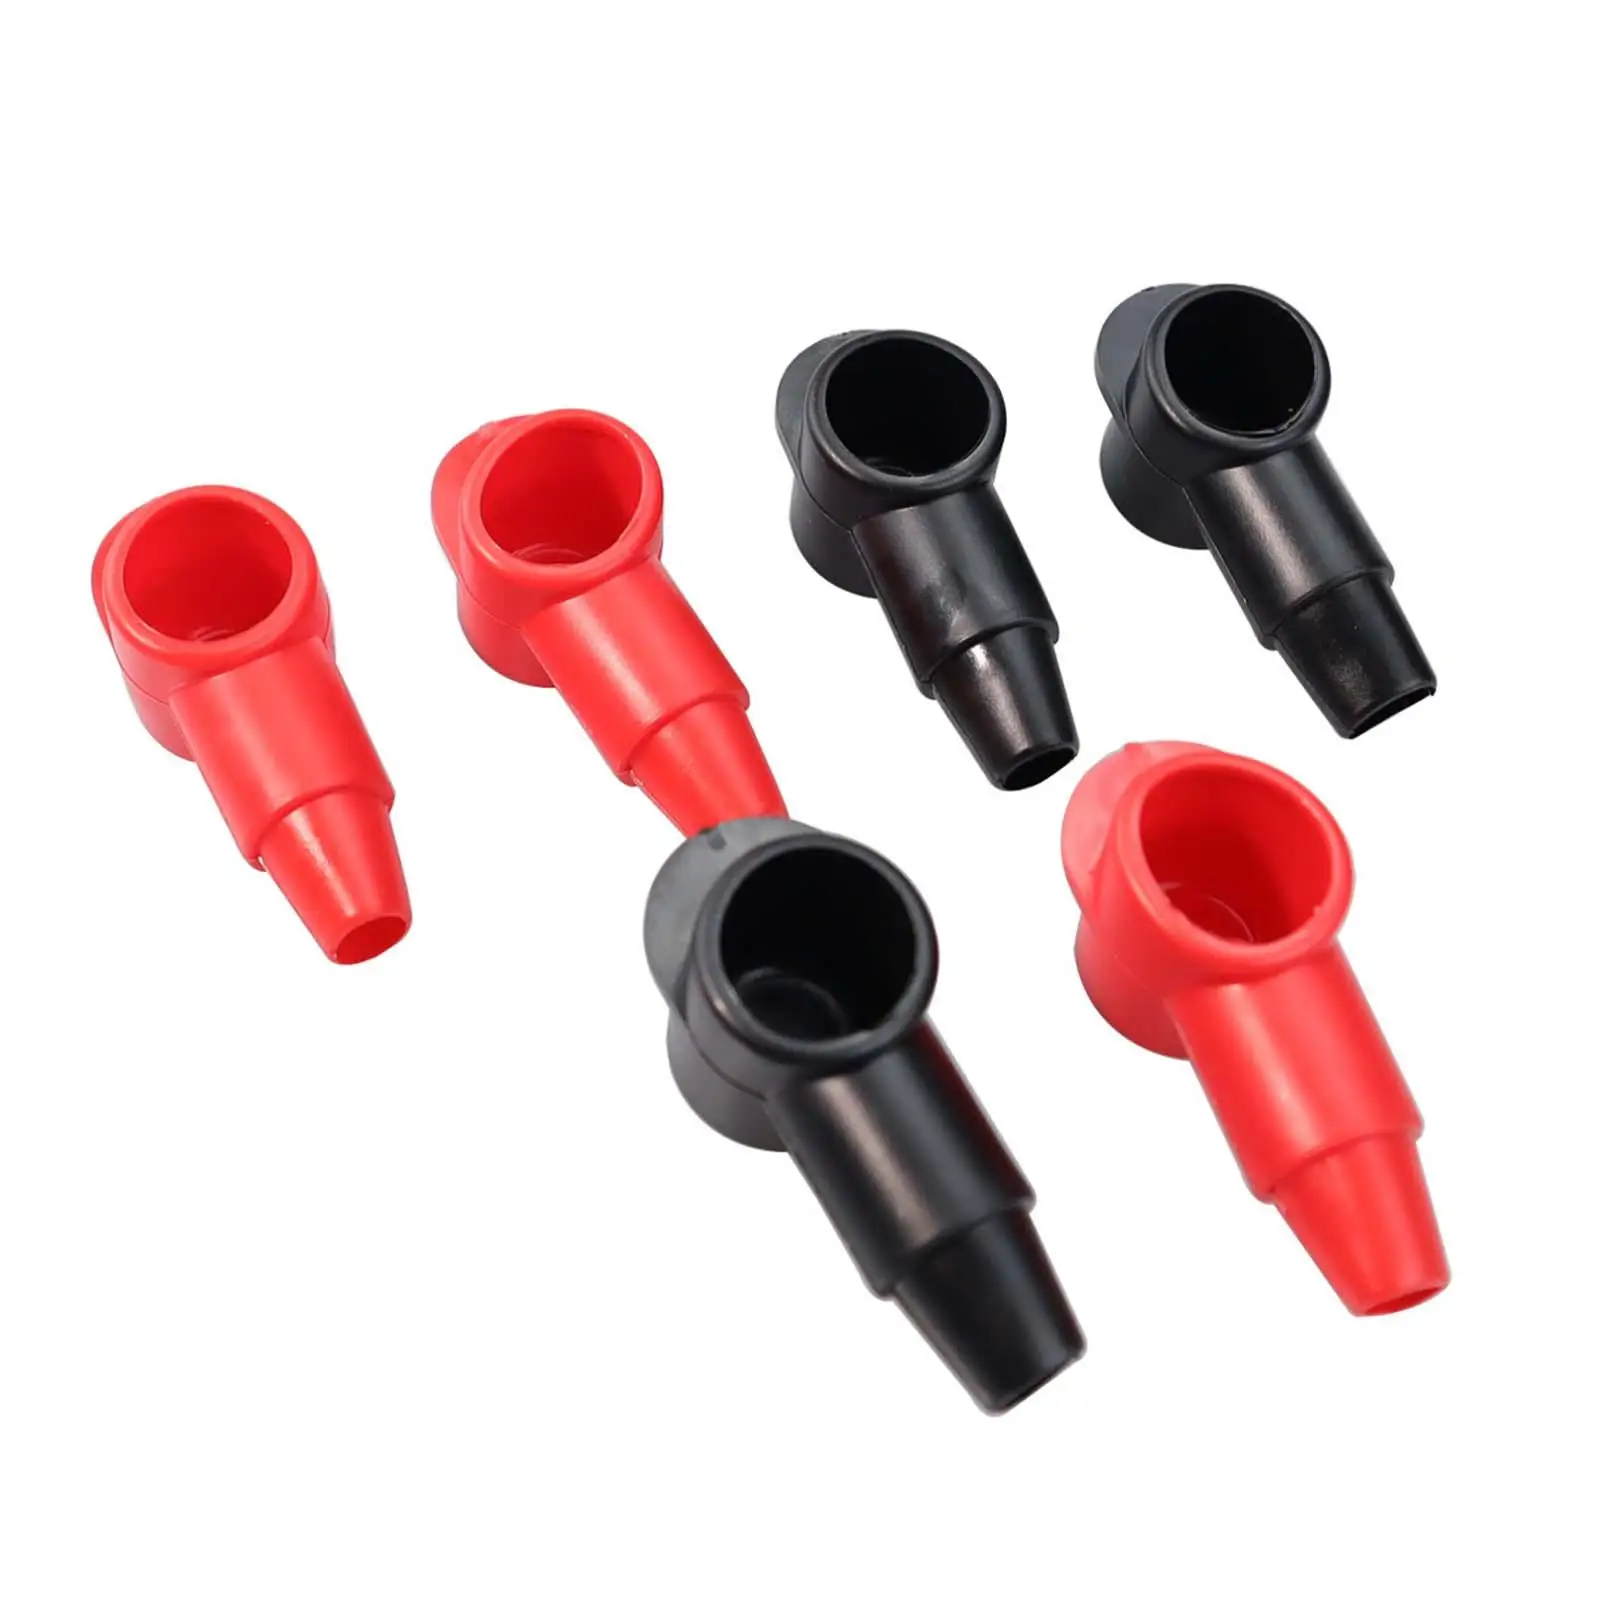 Battery Stud Terminal Covers Red and Black Flexible Protective Terminal Caps for Trucks Automotive Cars Marine Boats